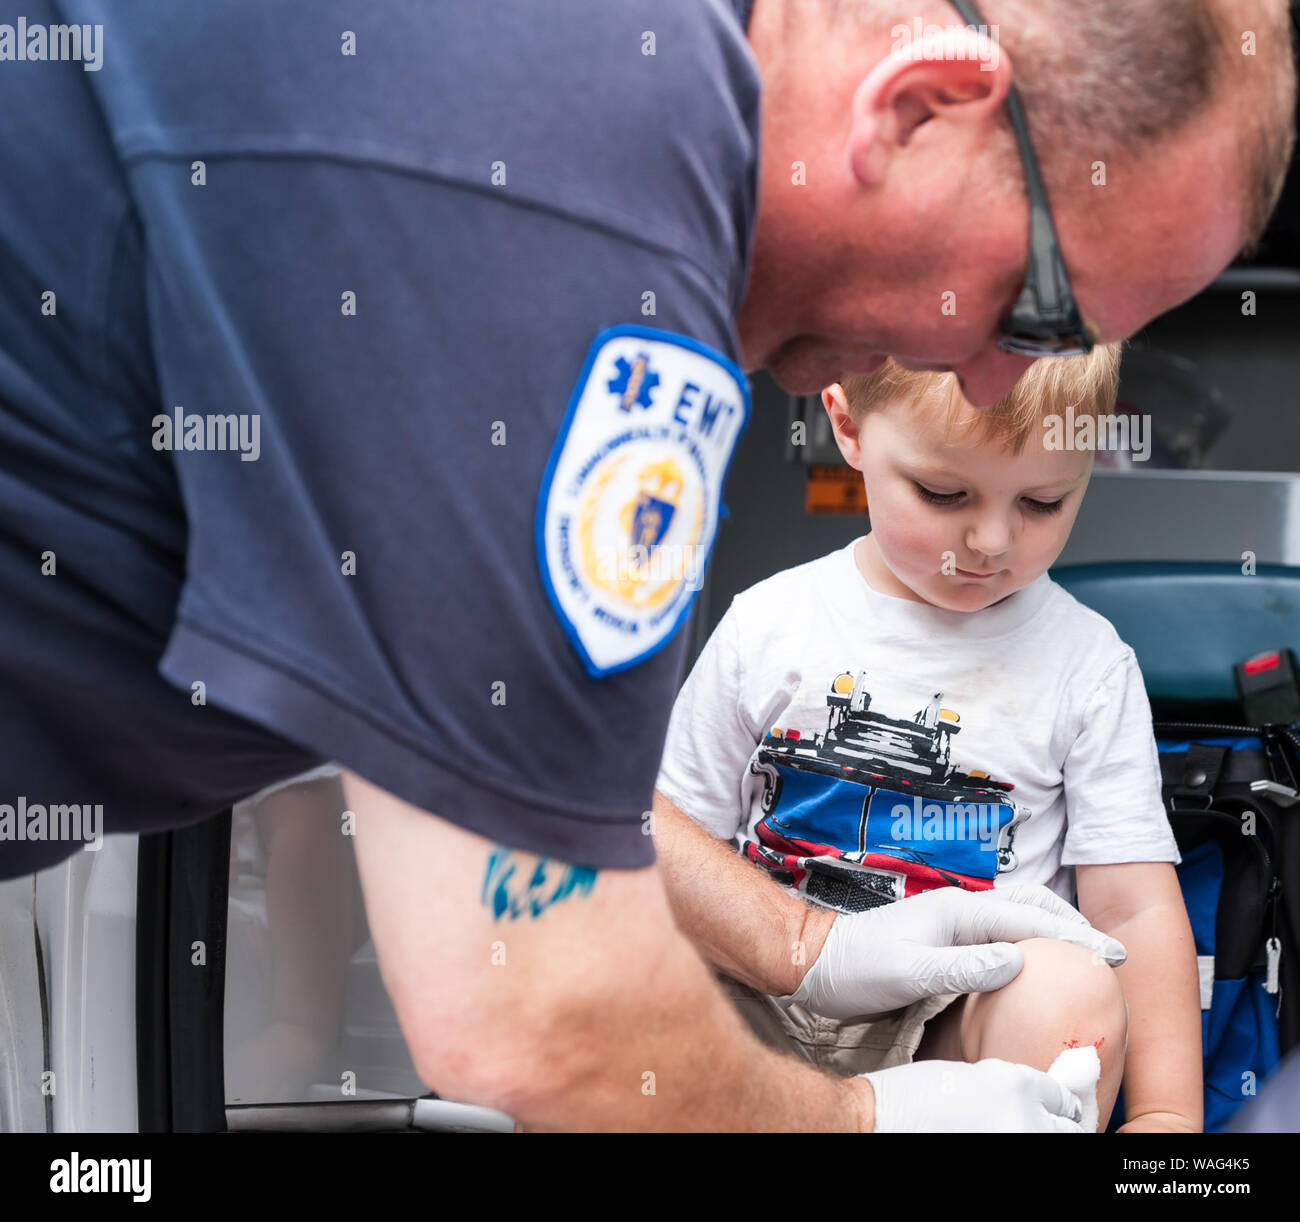 A very young boy at the Massachusetts Run for the Fallen, charity event to help Massachusetts military families, being helped by a local EMT. Stock Photo